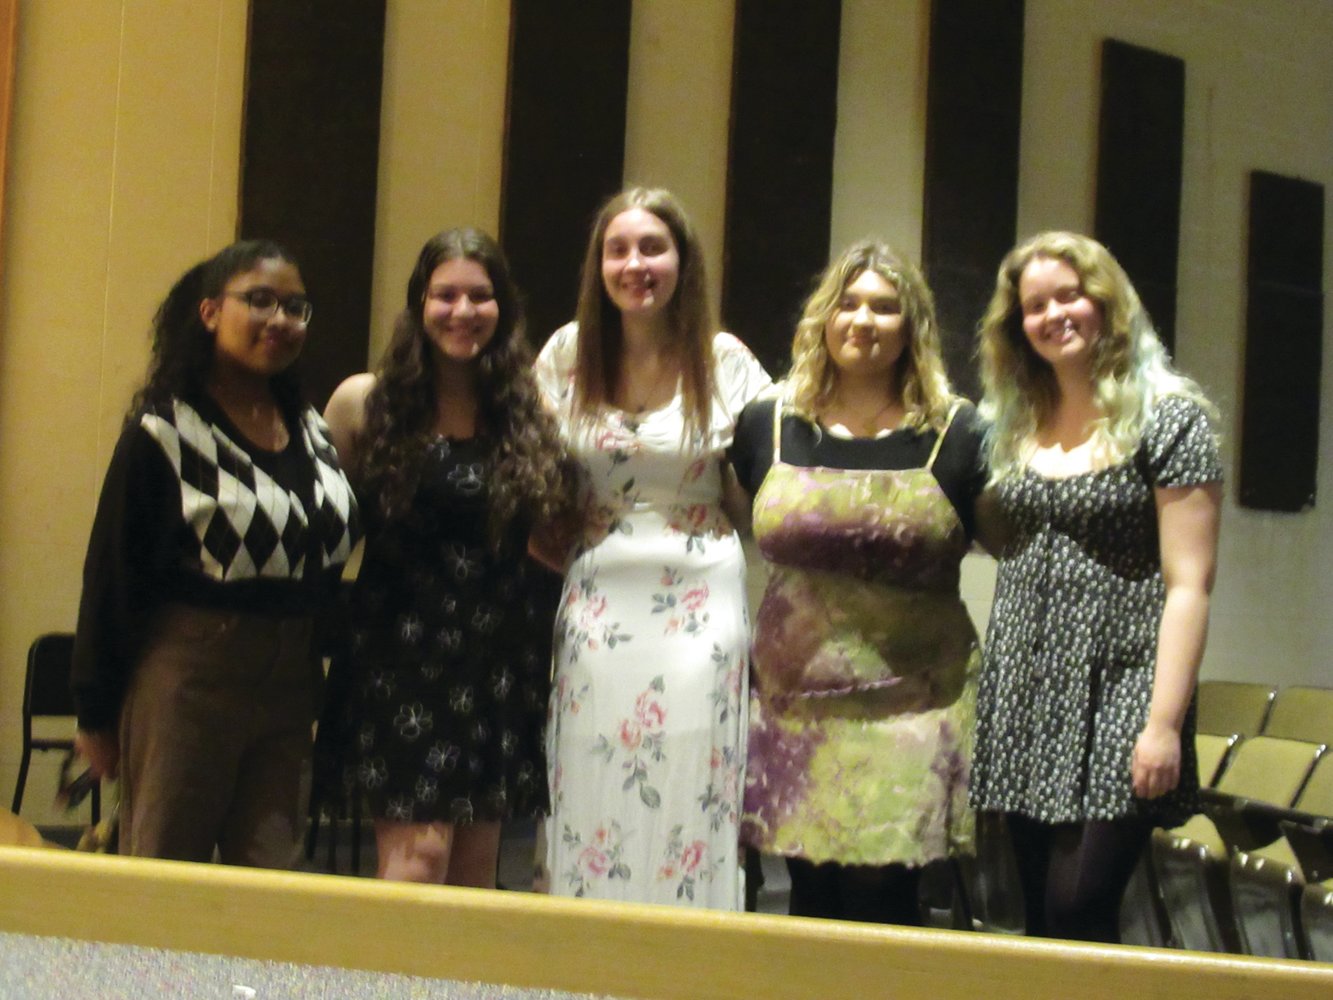 SPECIAL SINGERS: Tri-M vocalist Abigail Salas, Melanie Capraro, Jullia Droukas, Destinee Costa and Tracy Blondin helped make last week’s National Honor Society Induction Ceremony super special when they sang the processional march.